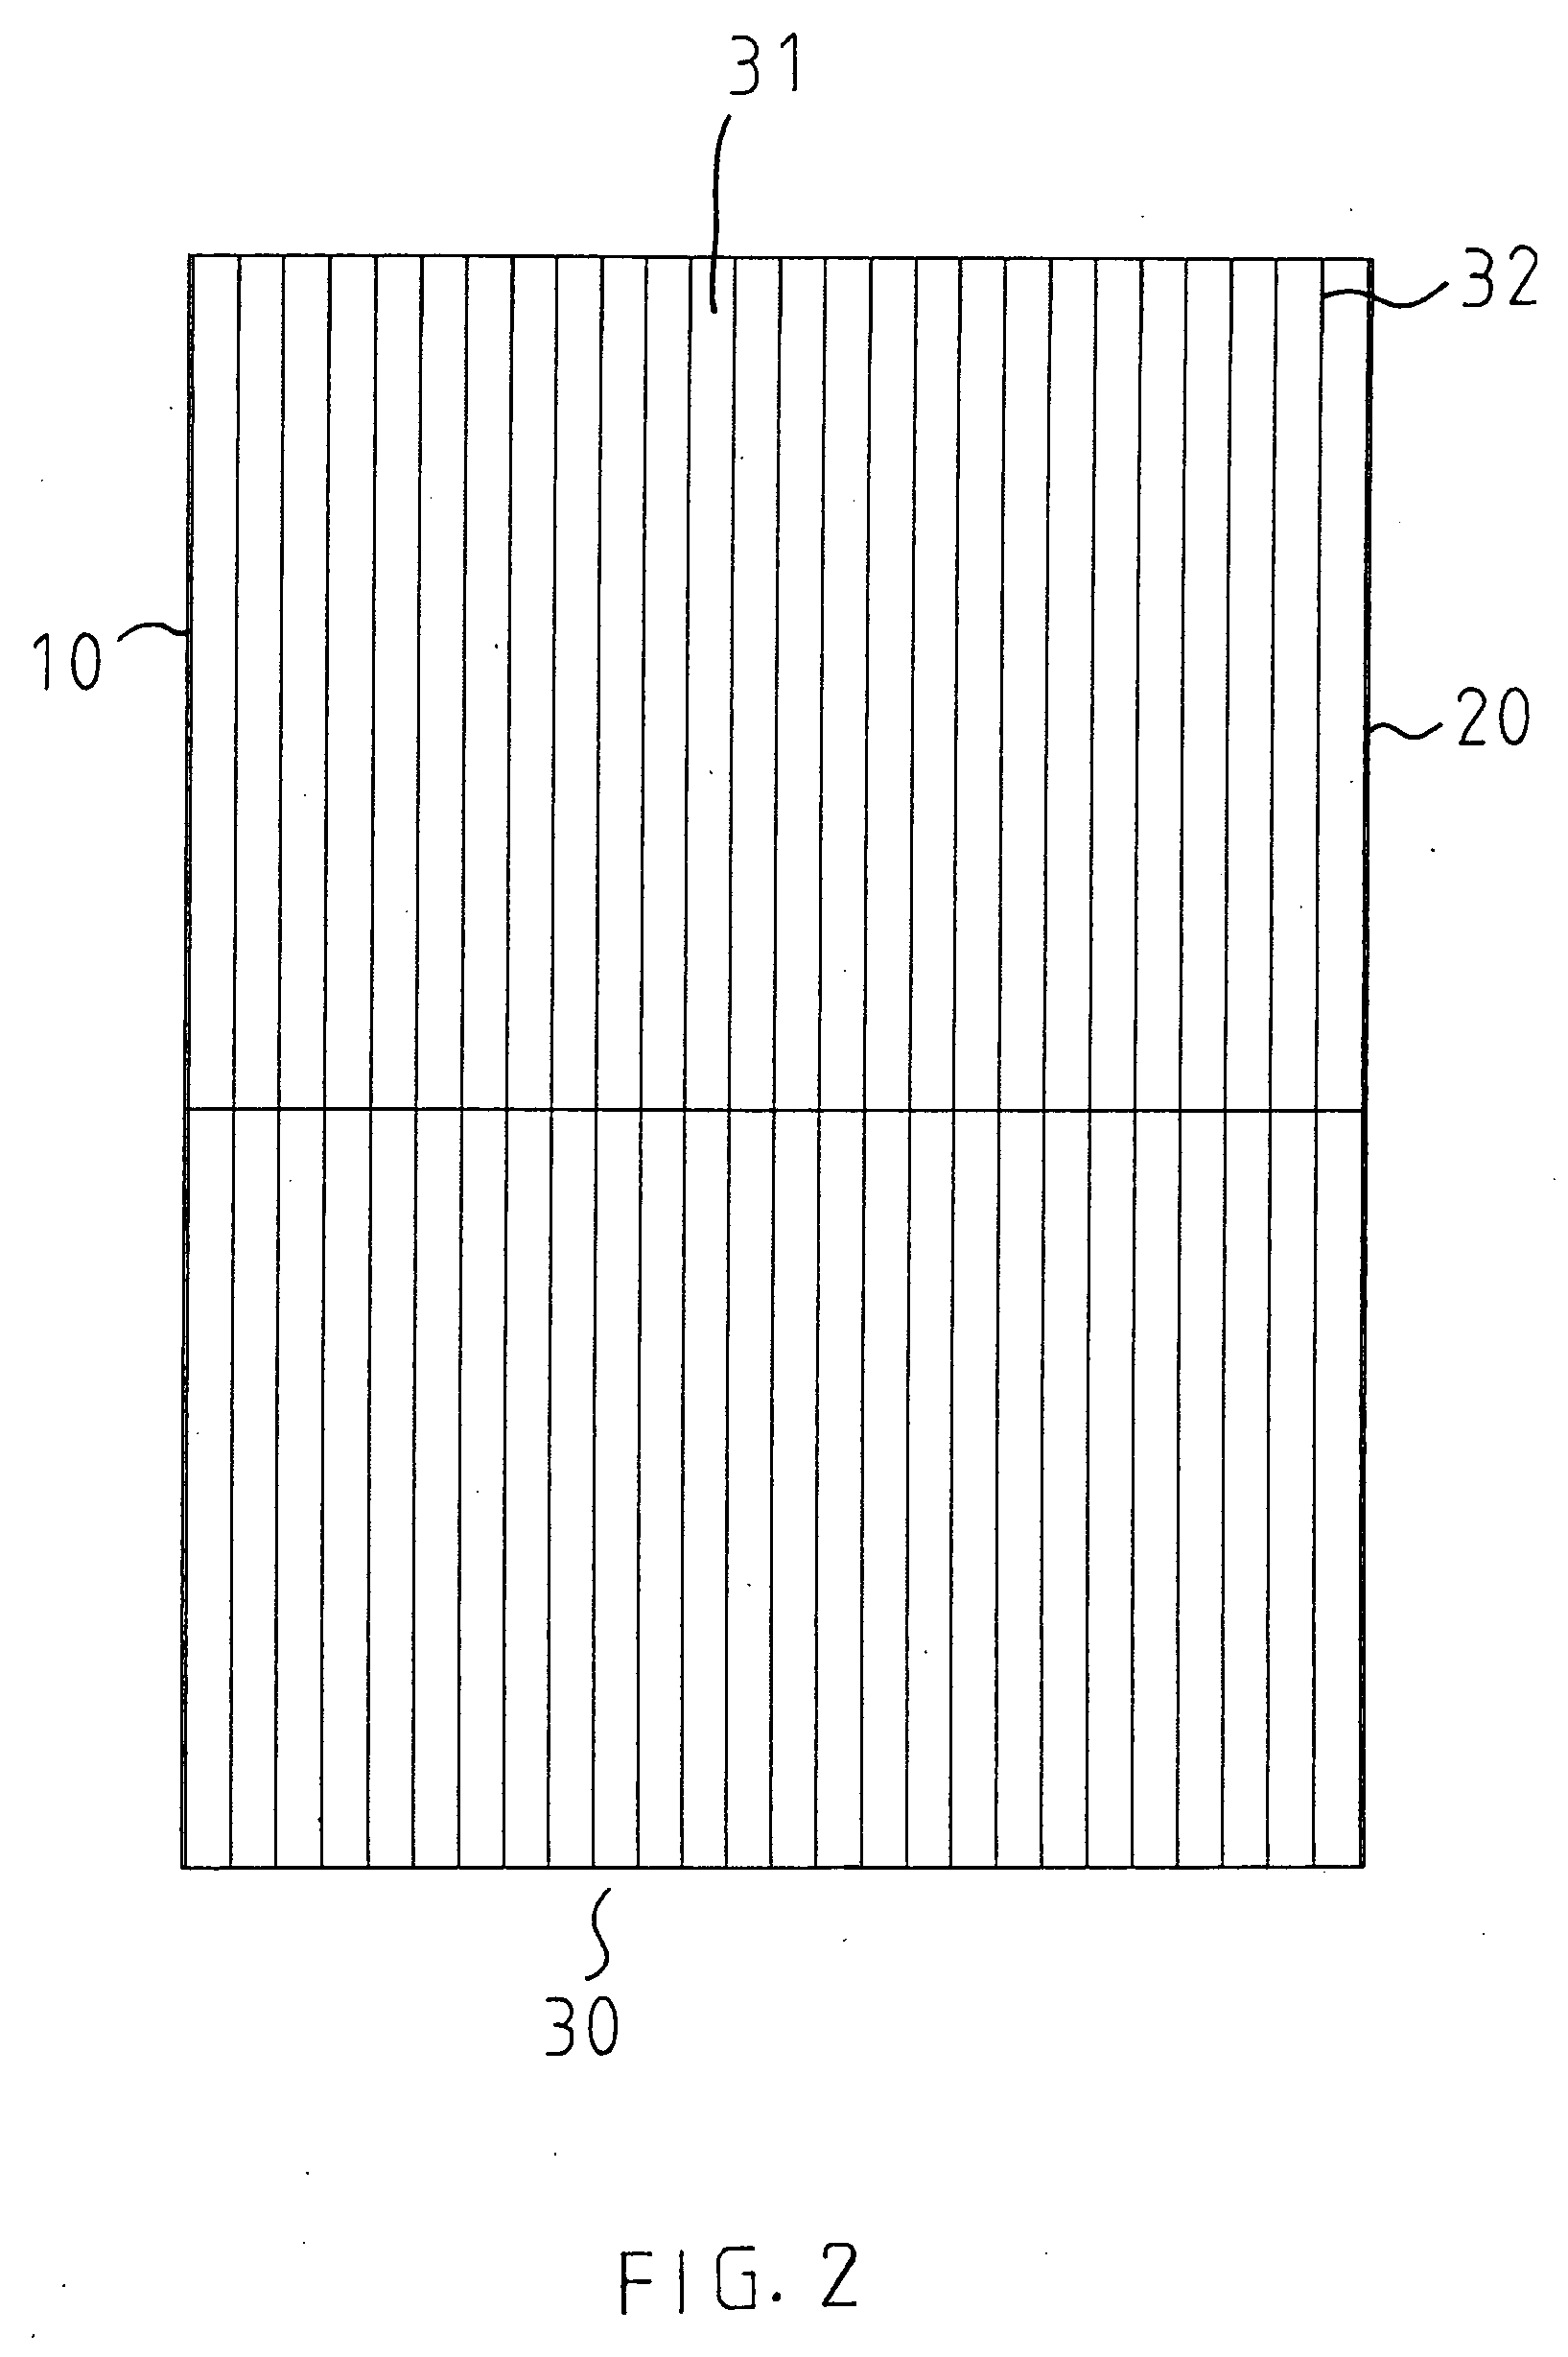 Expanding filing box having a sorting function and facilitating a user placing and taking out files